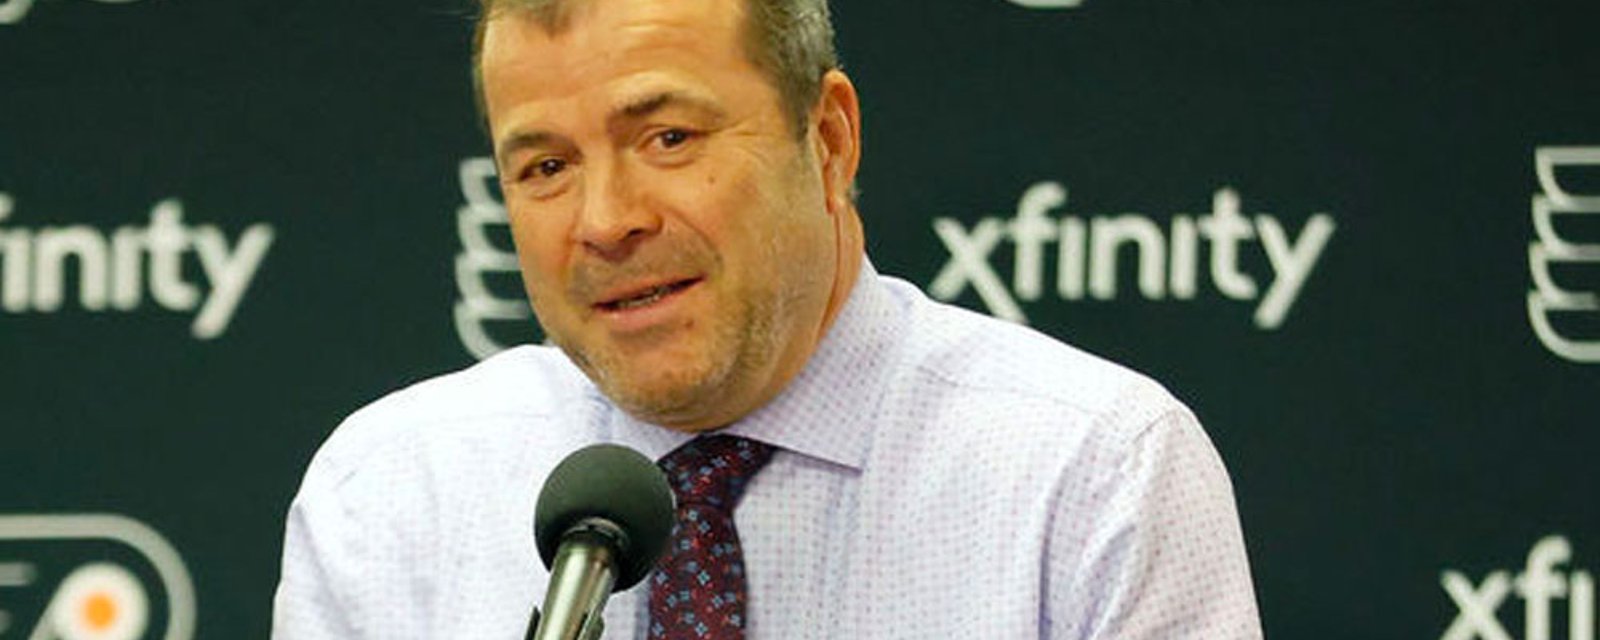 Fans outraged by Flyers’ Vigneault’s comments amidst NHL boycott! 